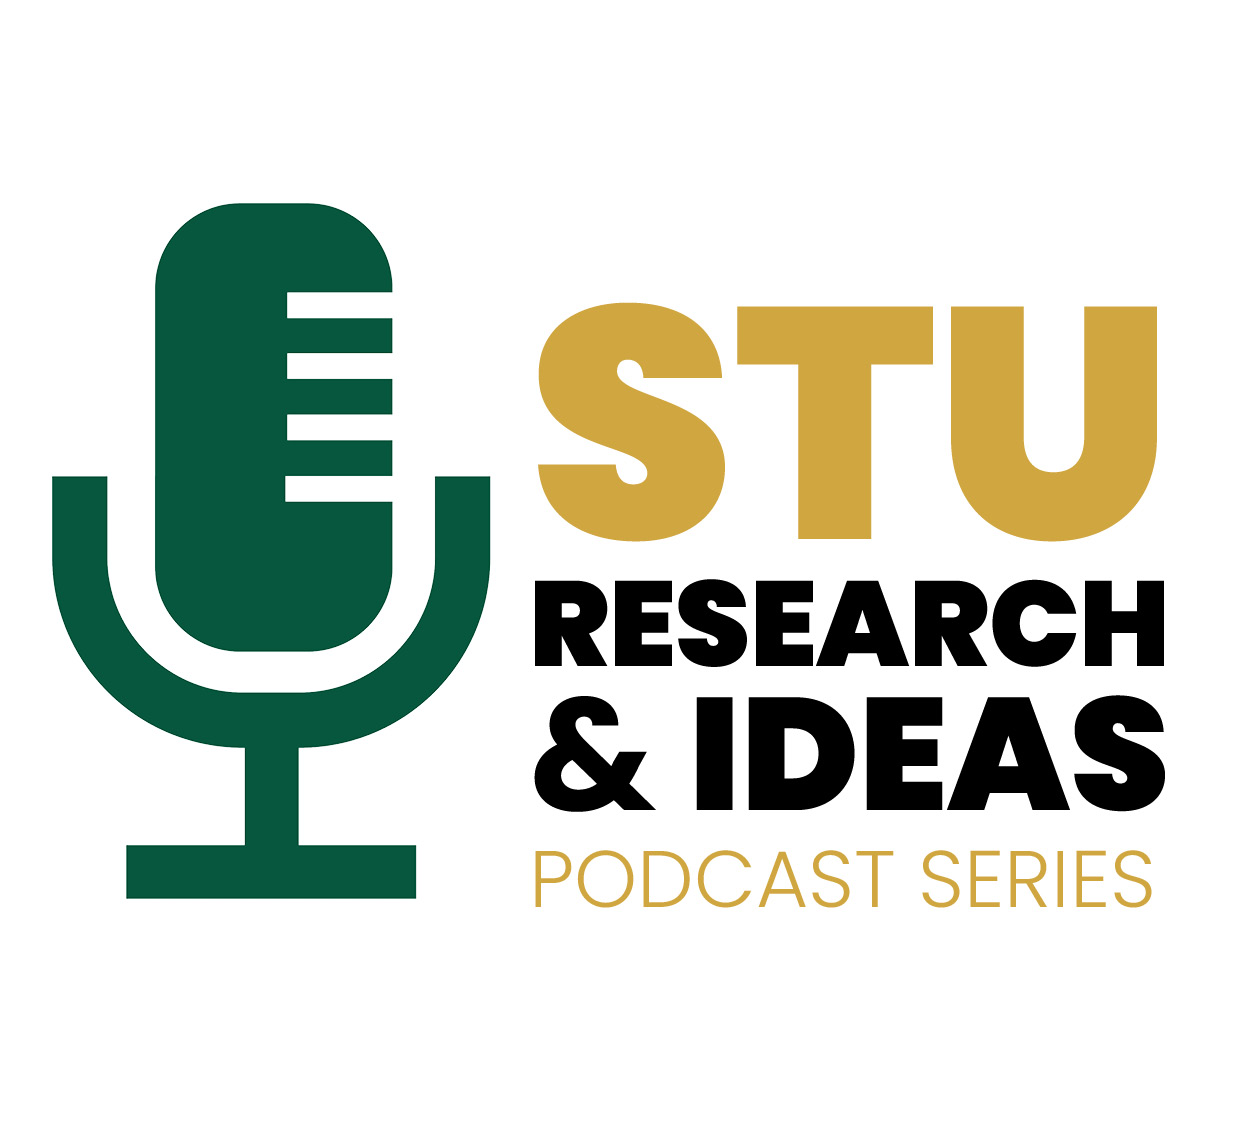 Image for Call for Proposals for Student Research & Ideas Podcast